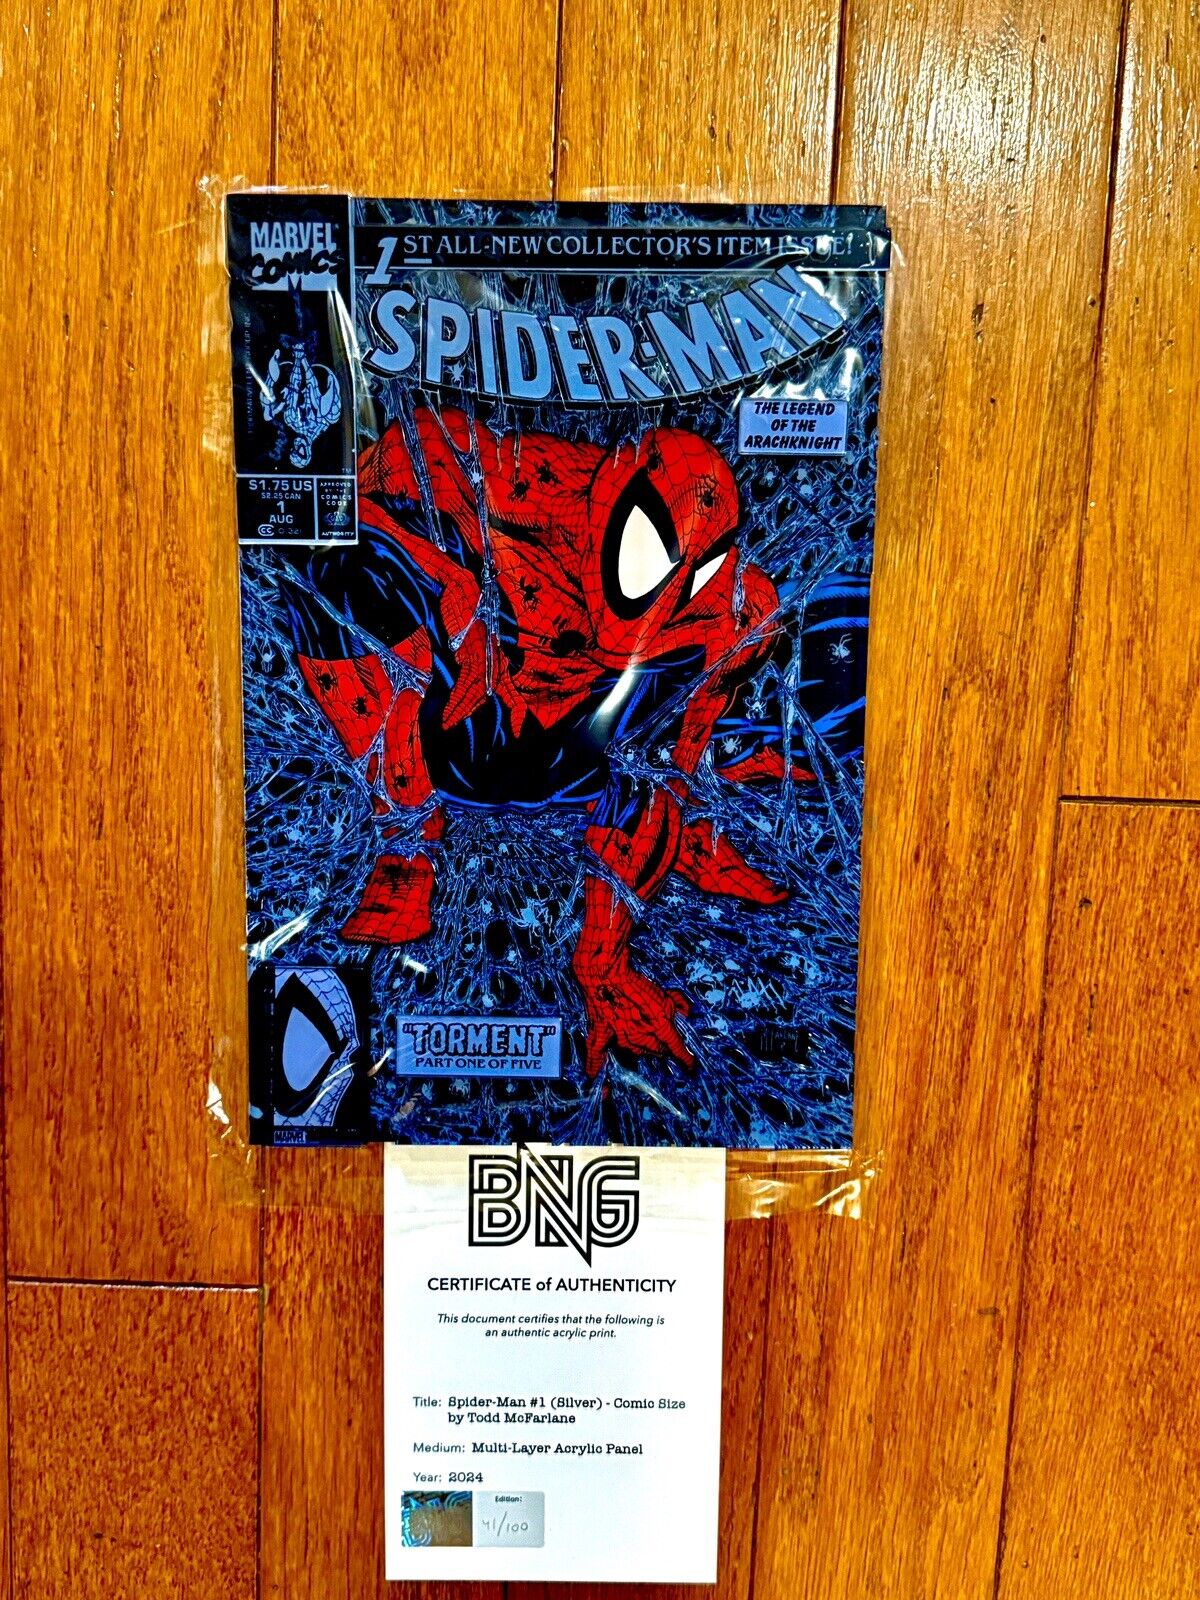 Todd McFarlane Spider-Man #1 Silver Variant MultiLayer Acrylic Comic LE BNG /100